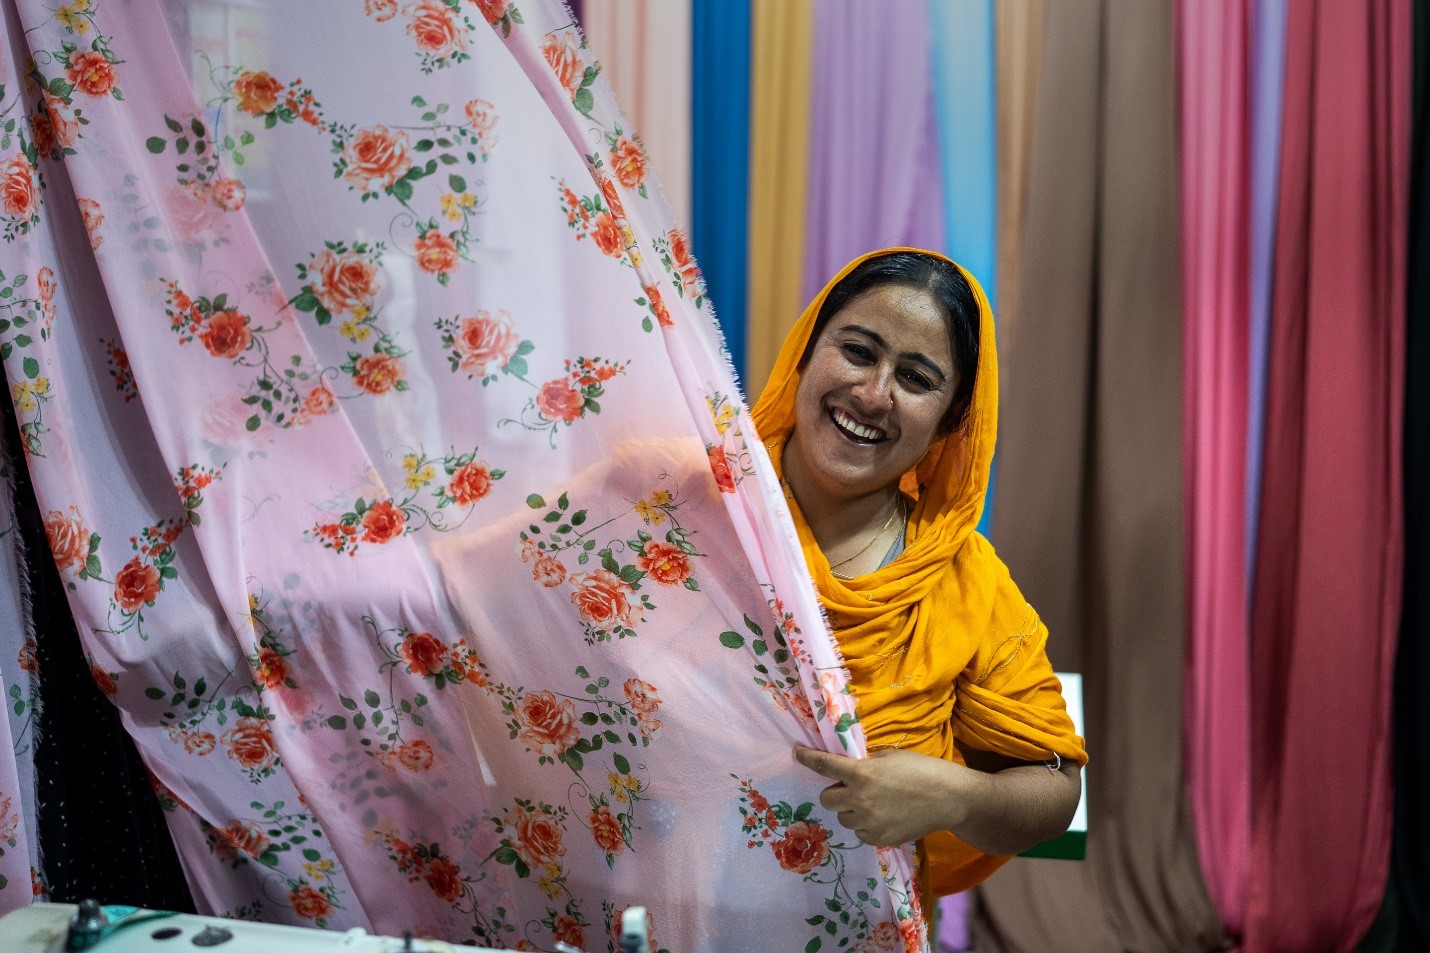 A lady holding fabric, smiling